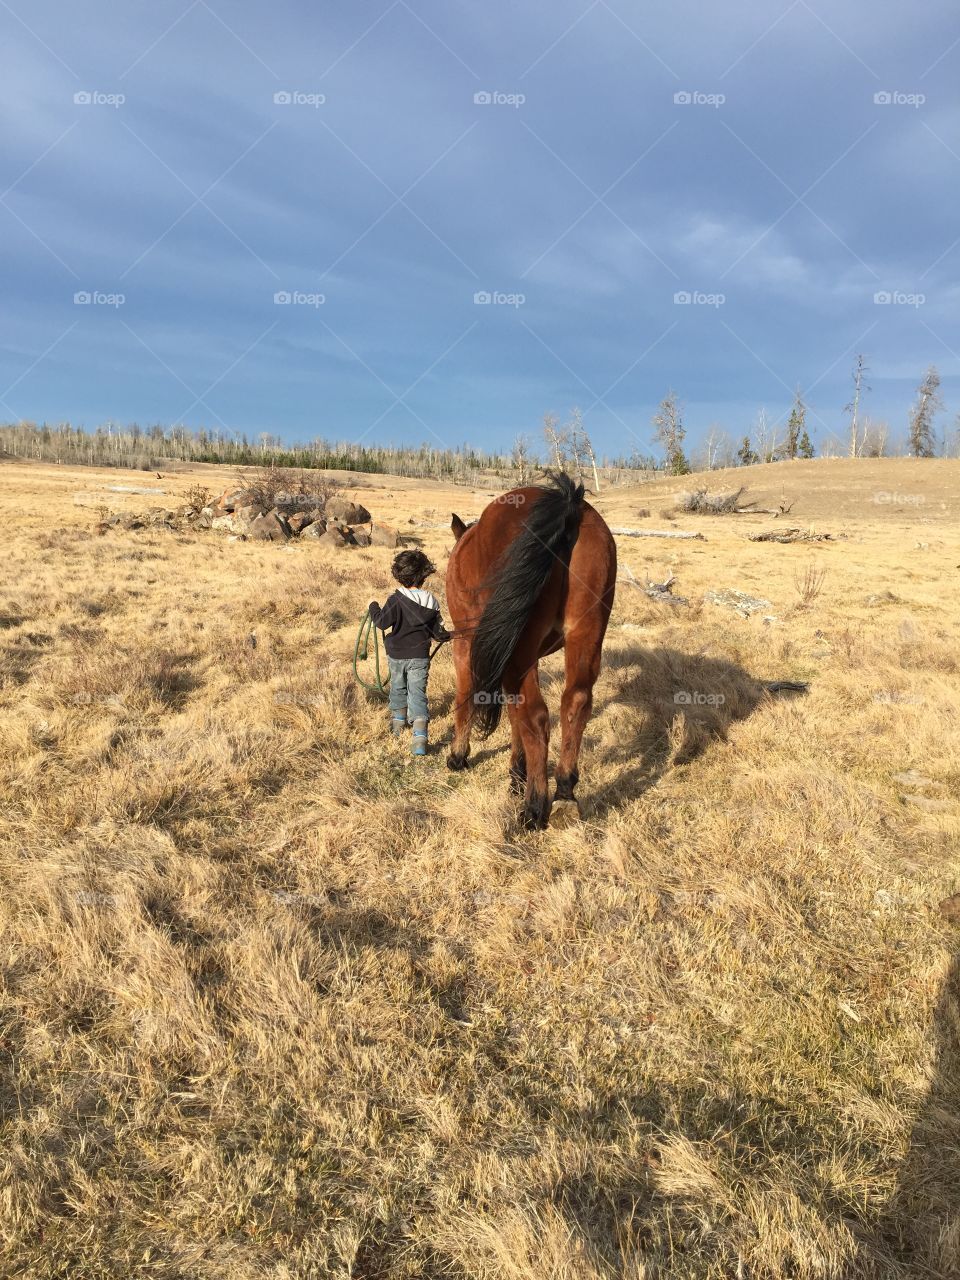 My son exercising our senior horse. This is the fourth generation of family to enjoy this horse. 